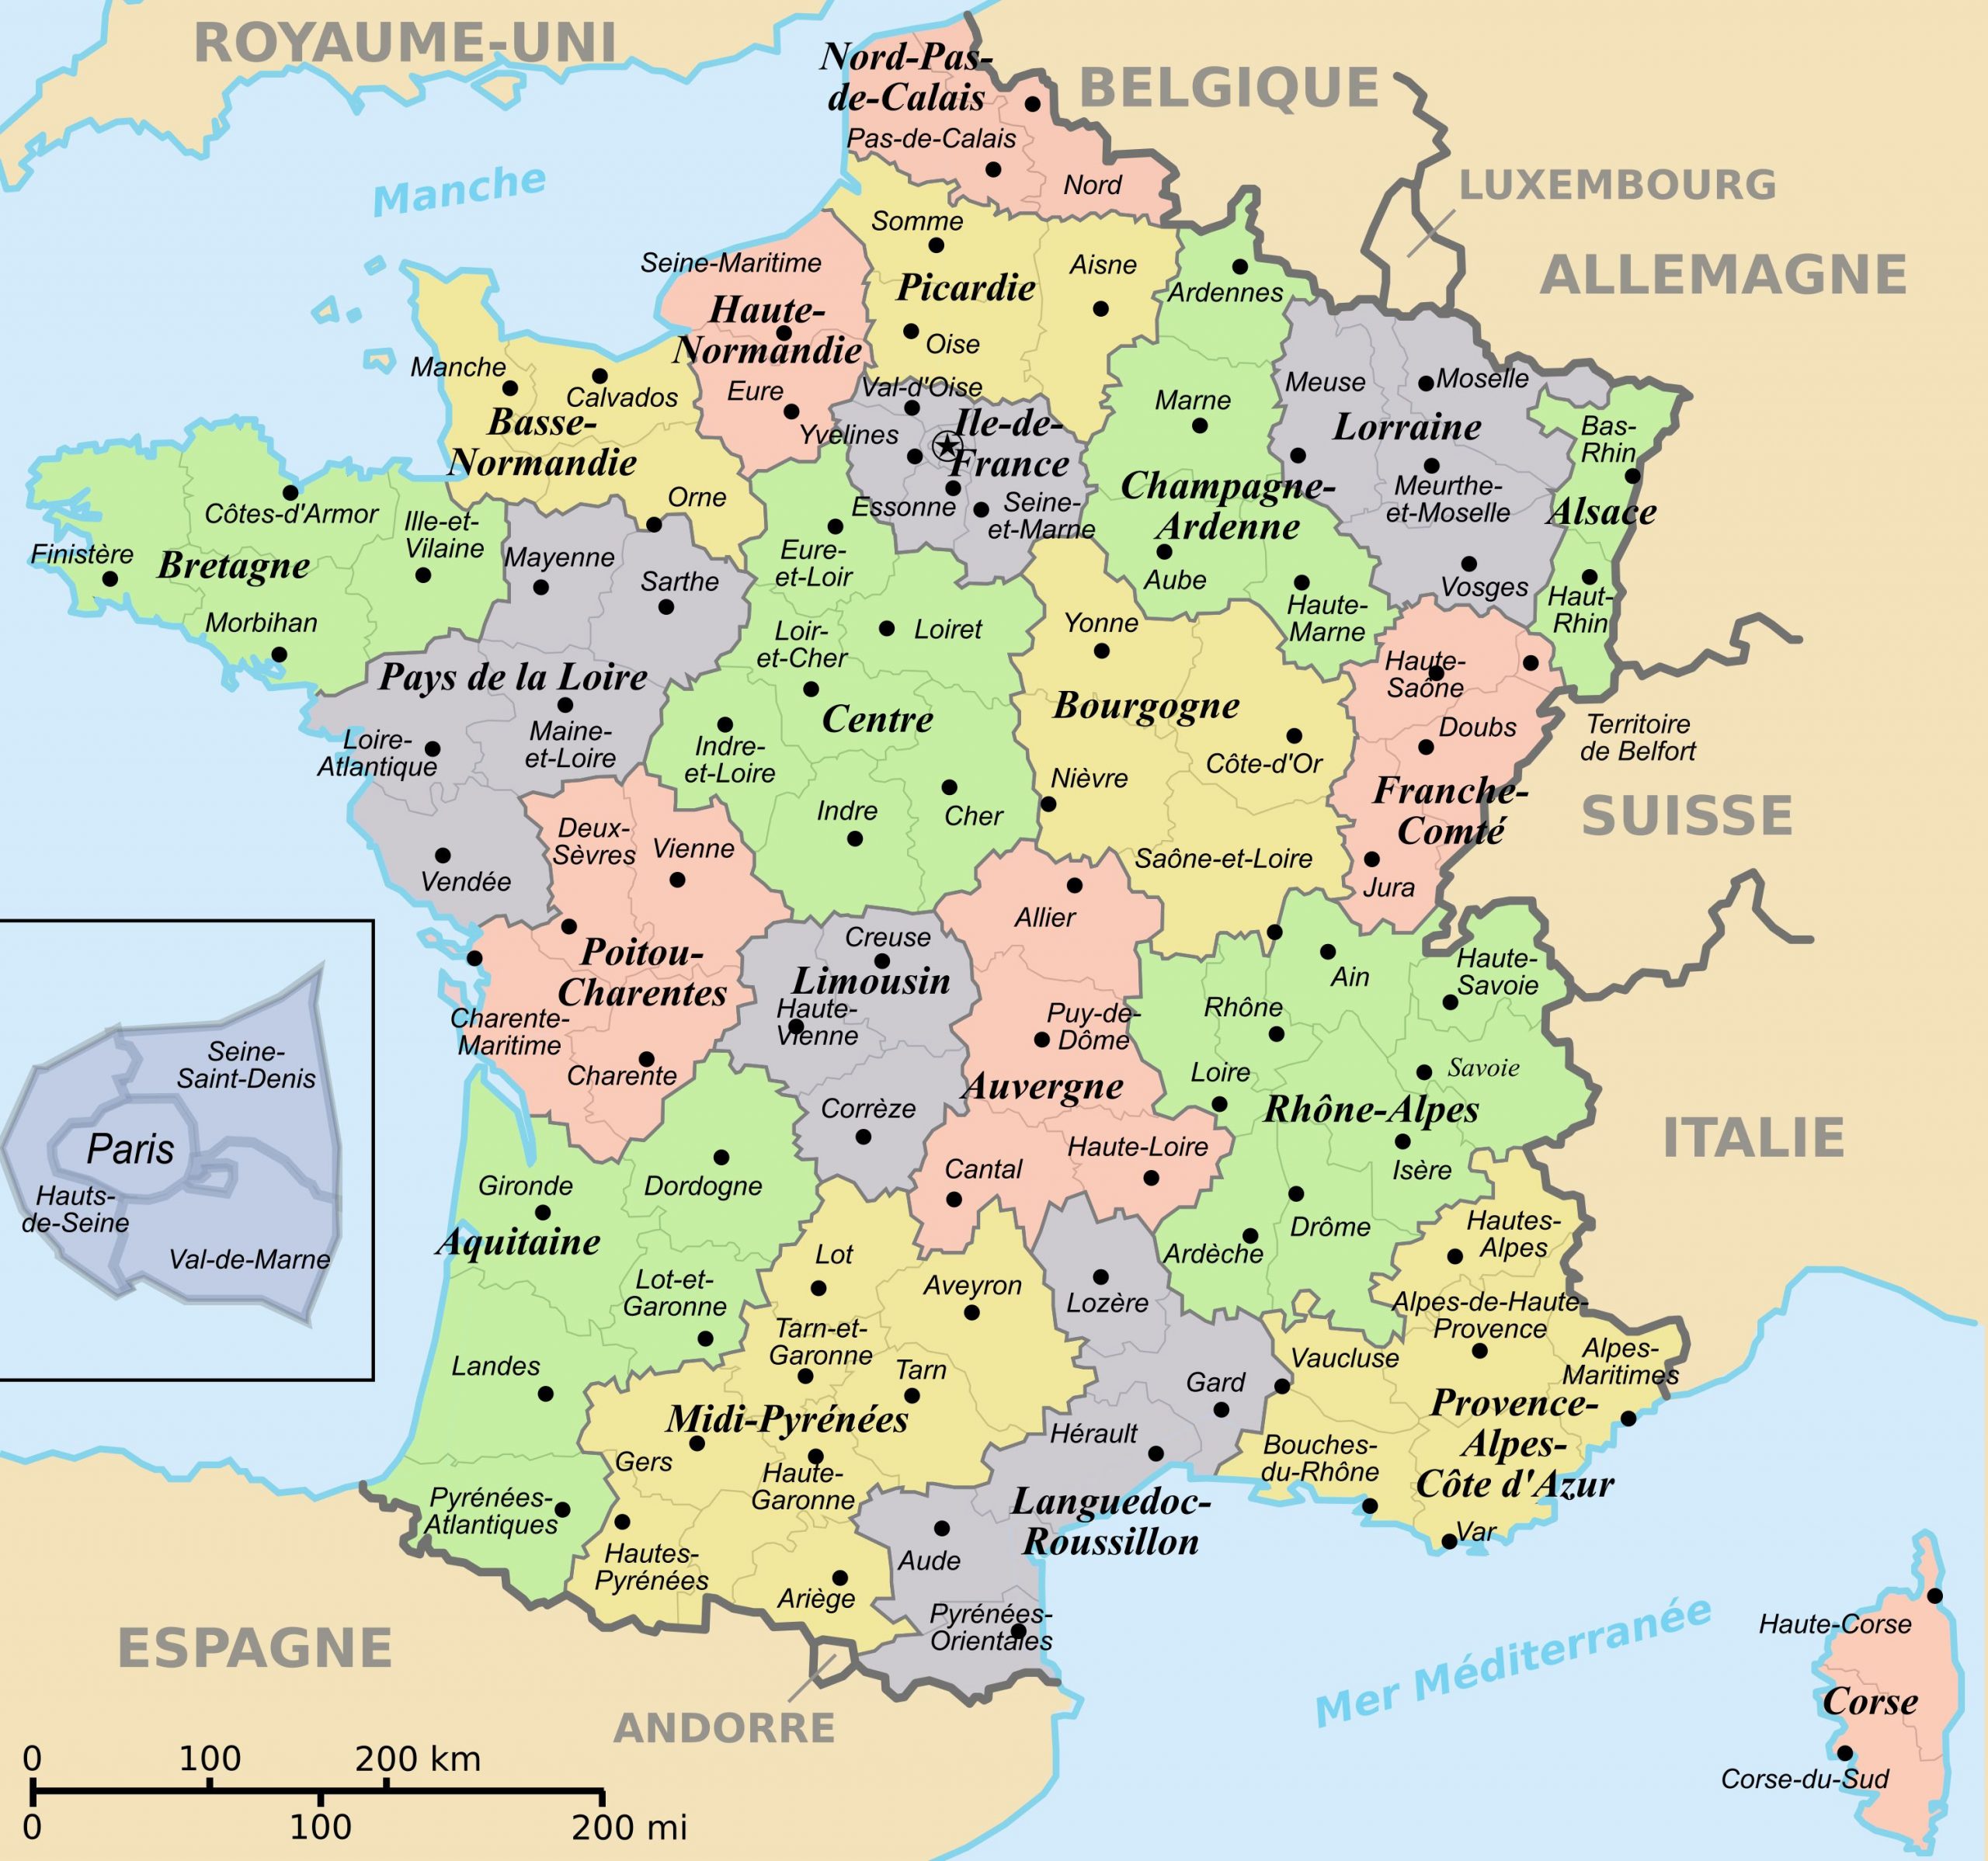 Regions And Departements Map Of France | France Map, Regions dedans Map De France Regions 